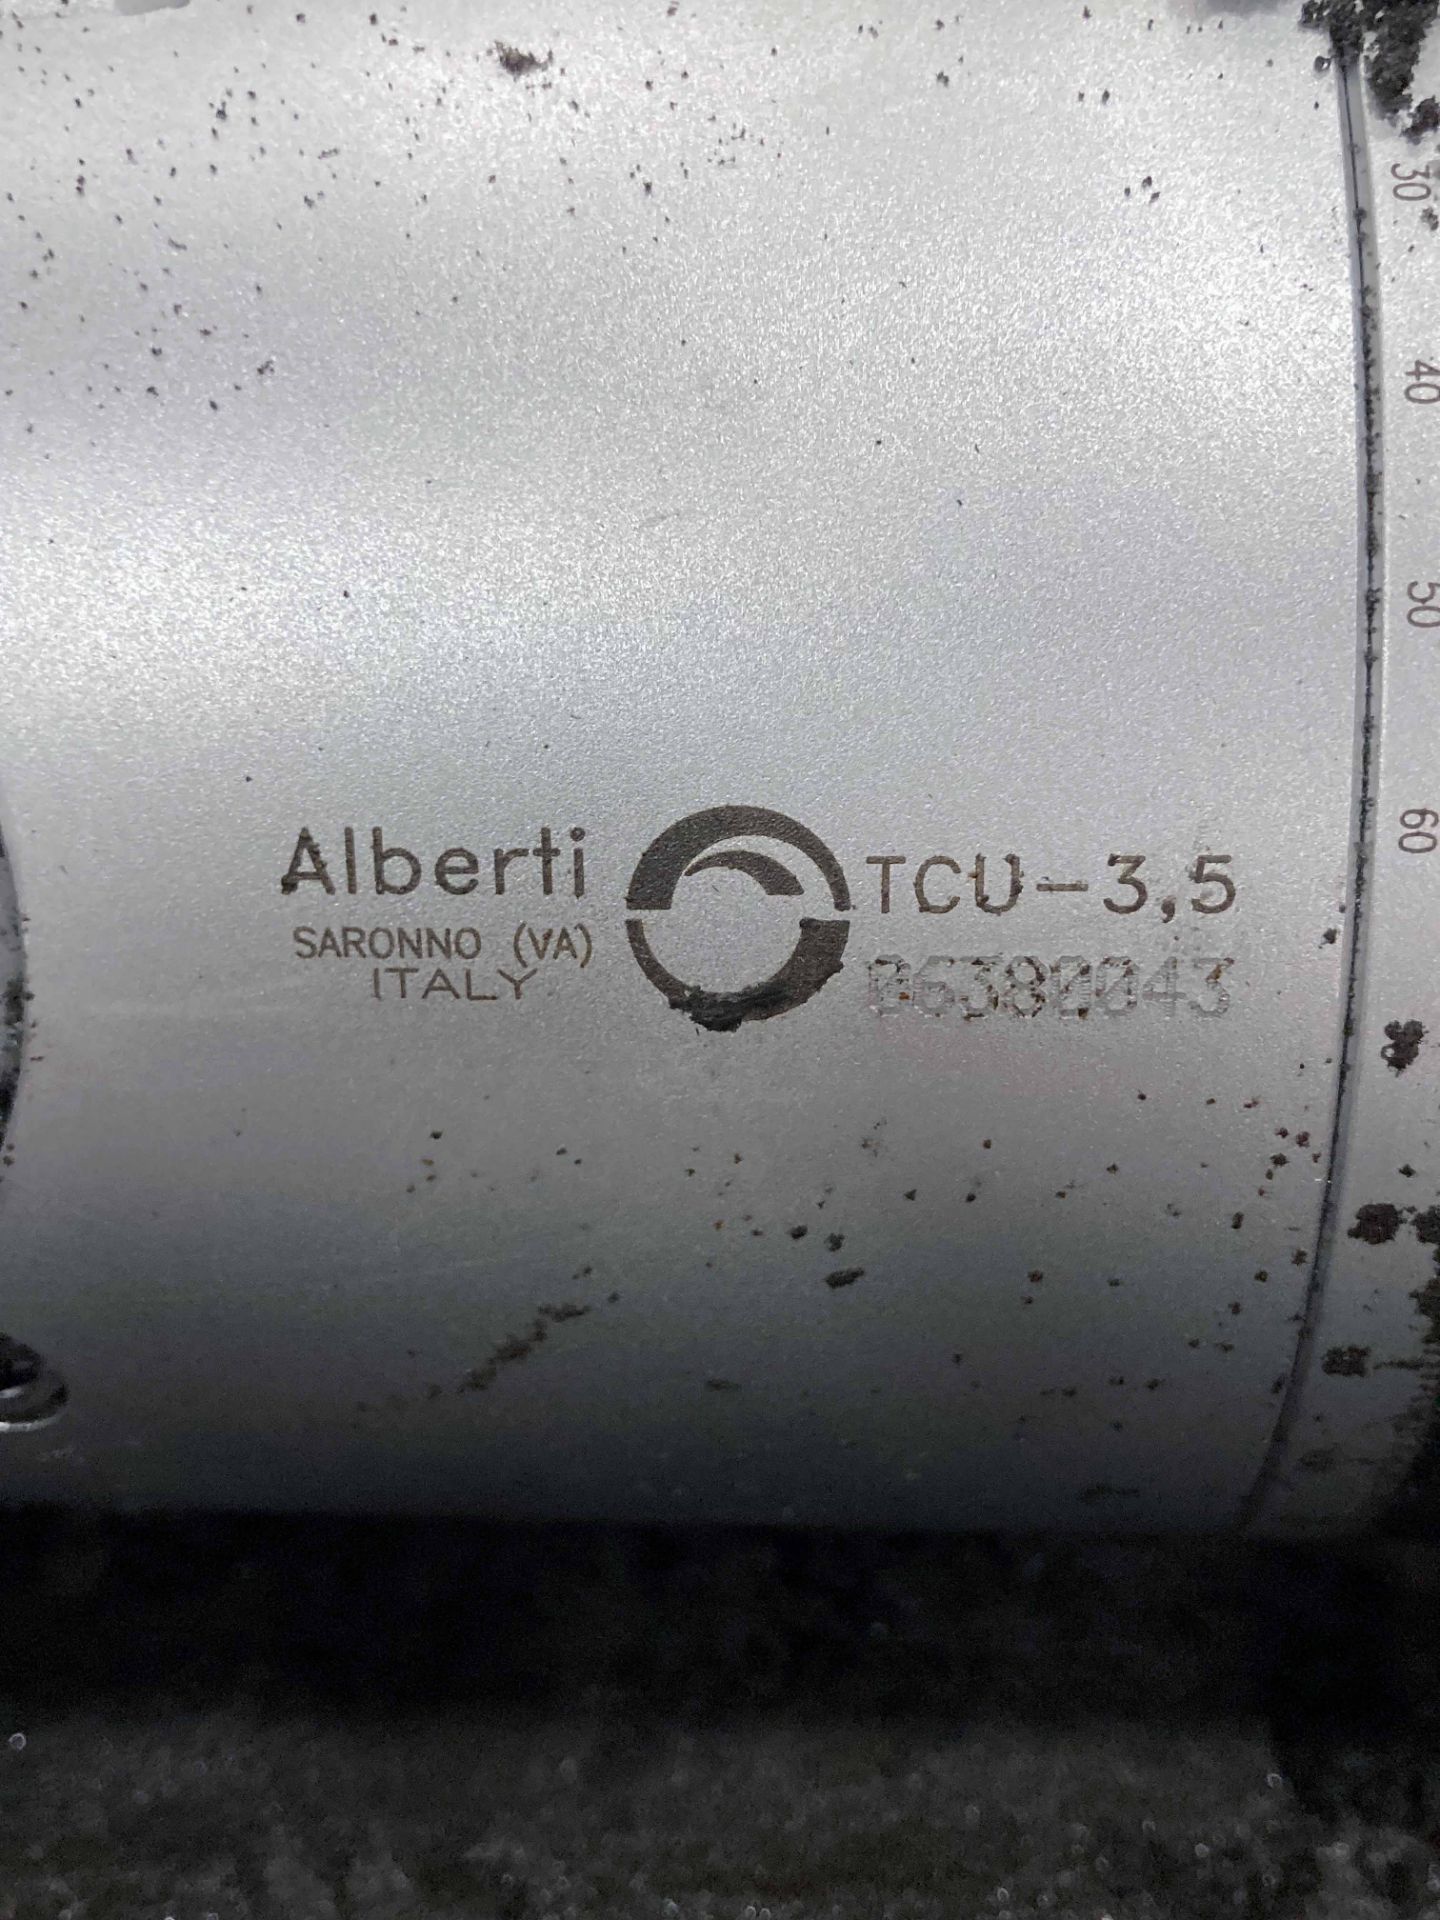 RIGHT ANGLE HEAD, ALBERTI MDL. TCU-3,5, S/N 06380043 (Located at: AF Global/Ameriforge R&D Facility, - Image 2 of 2